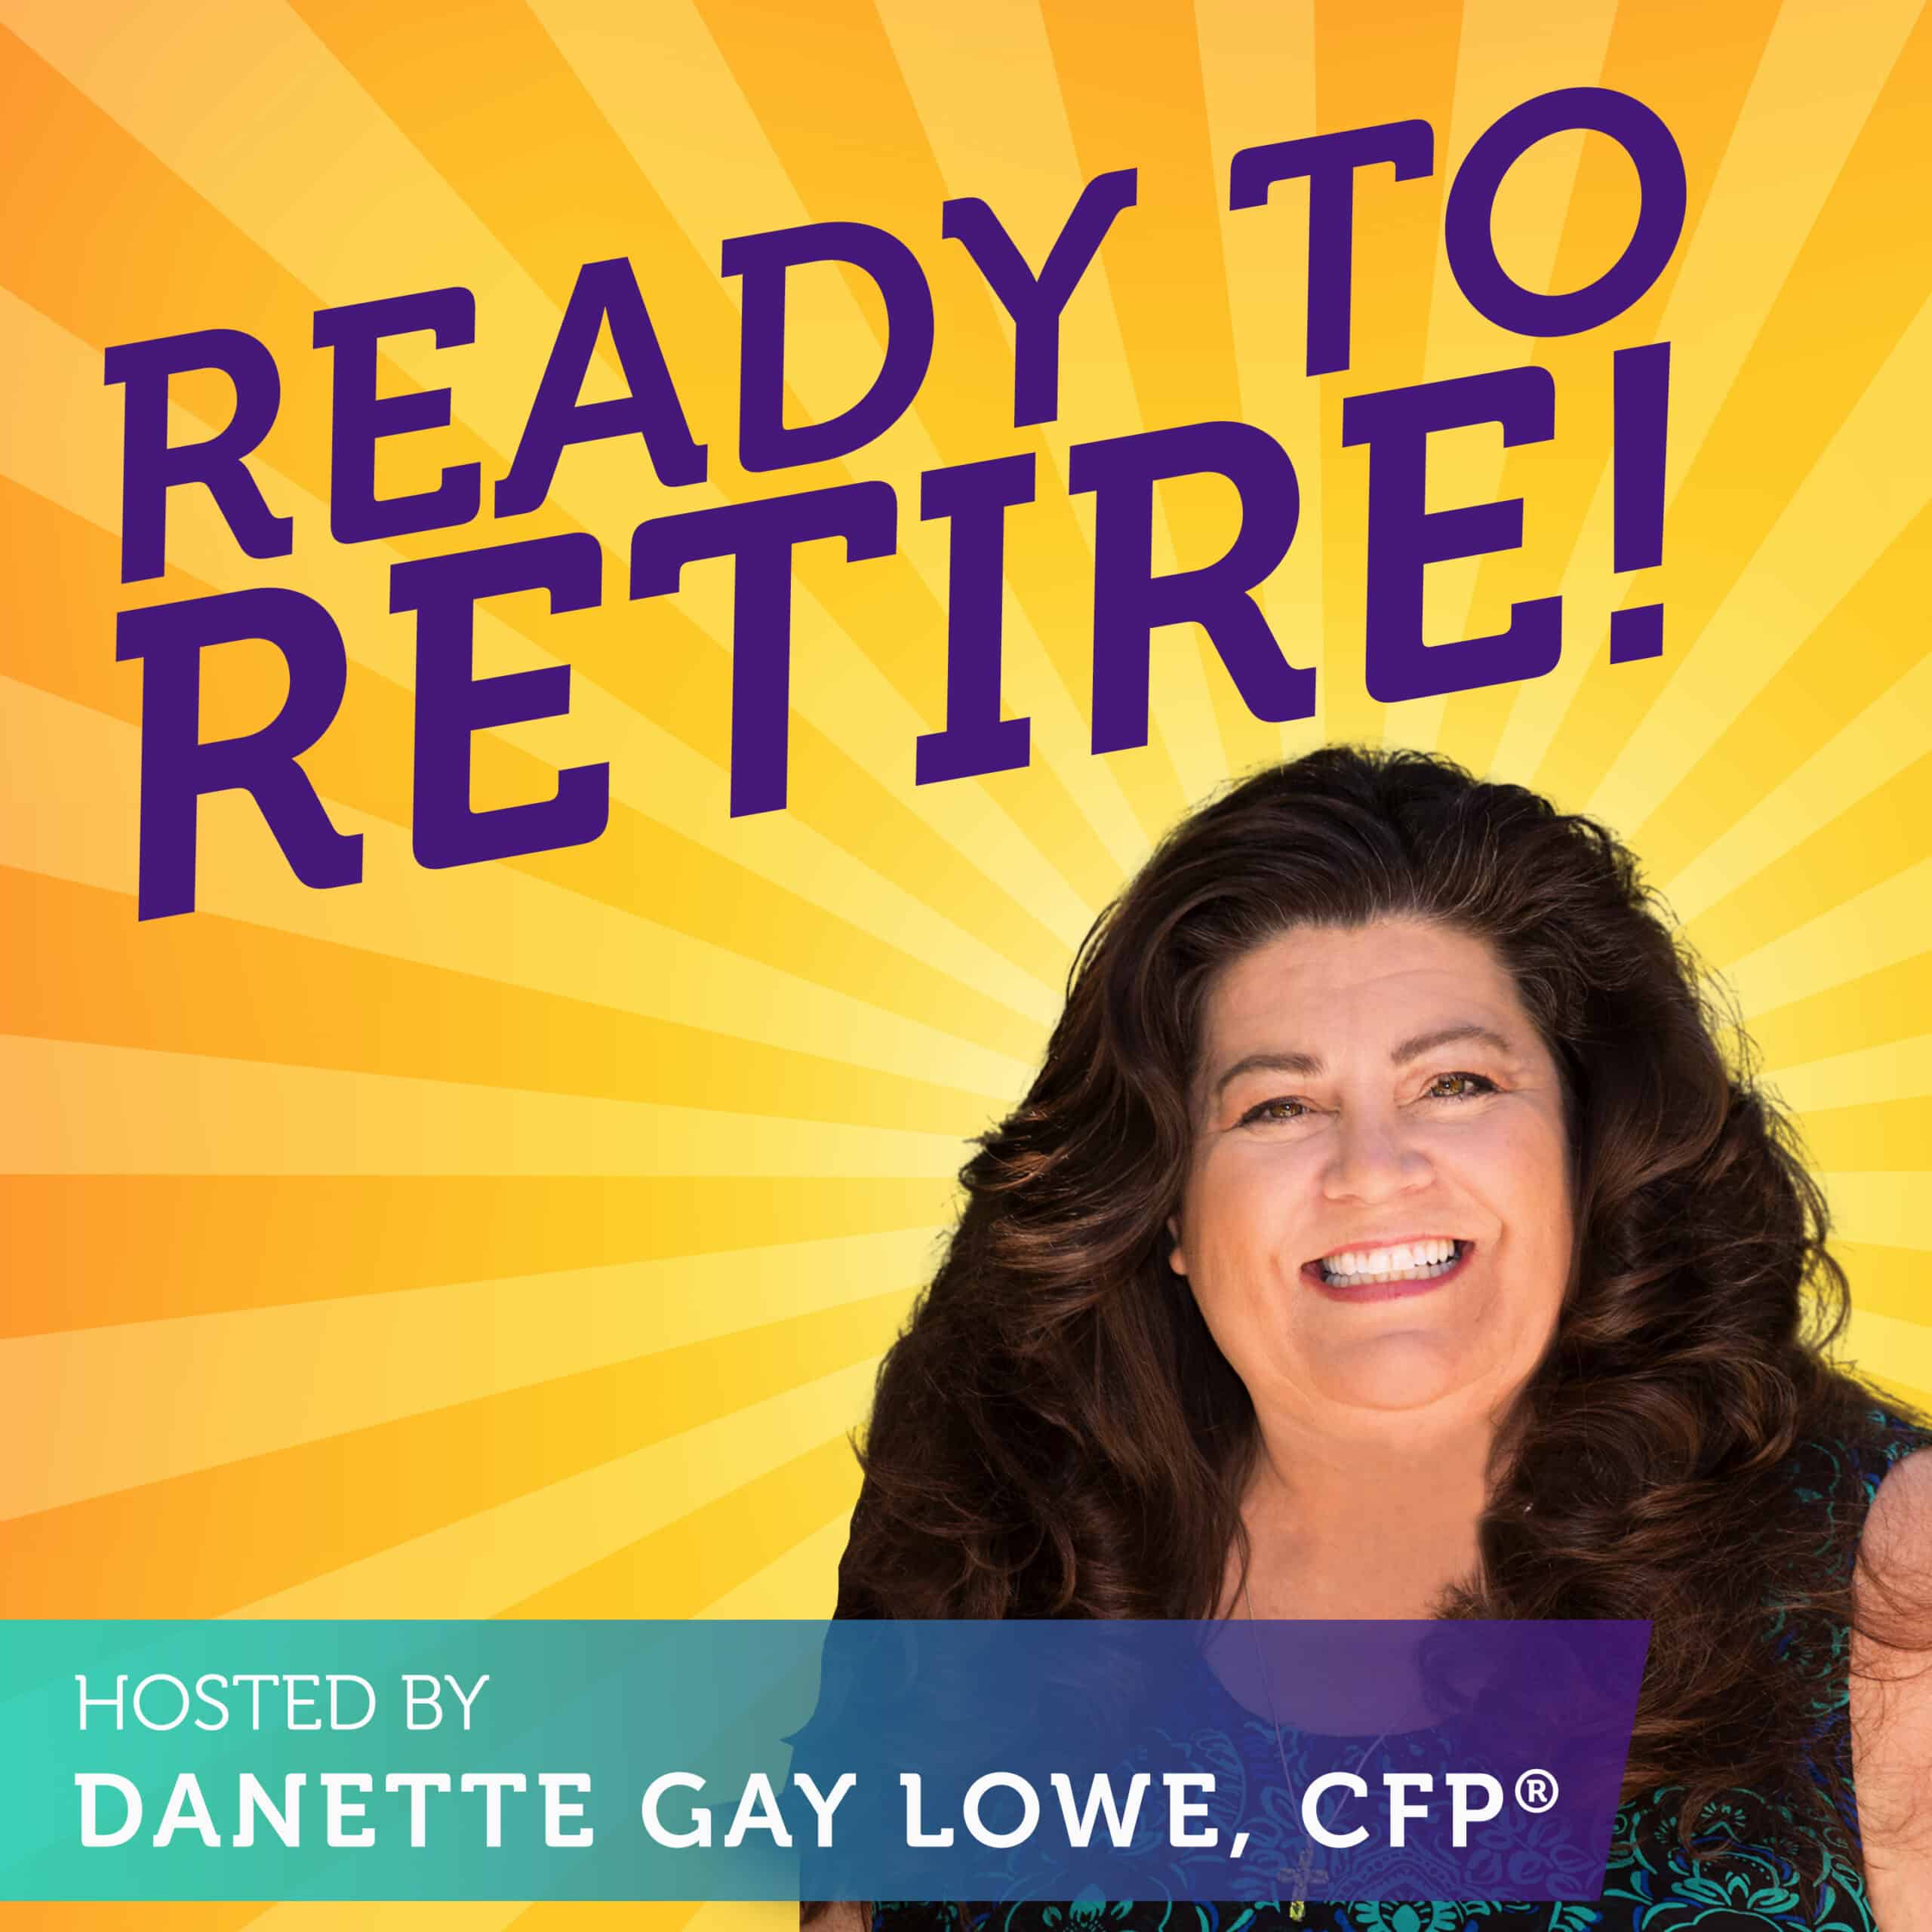 Ready to retire with Danette Lowe, CPA, and empower your midlife through thoughtful financial planning.